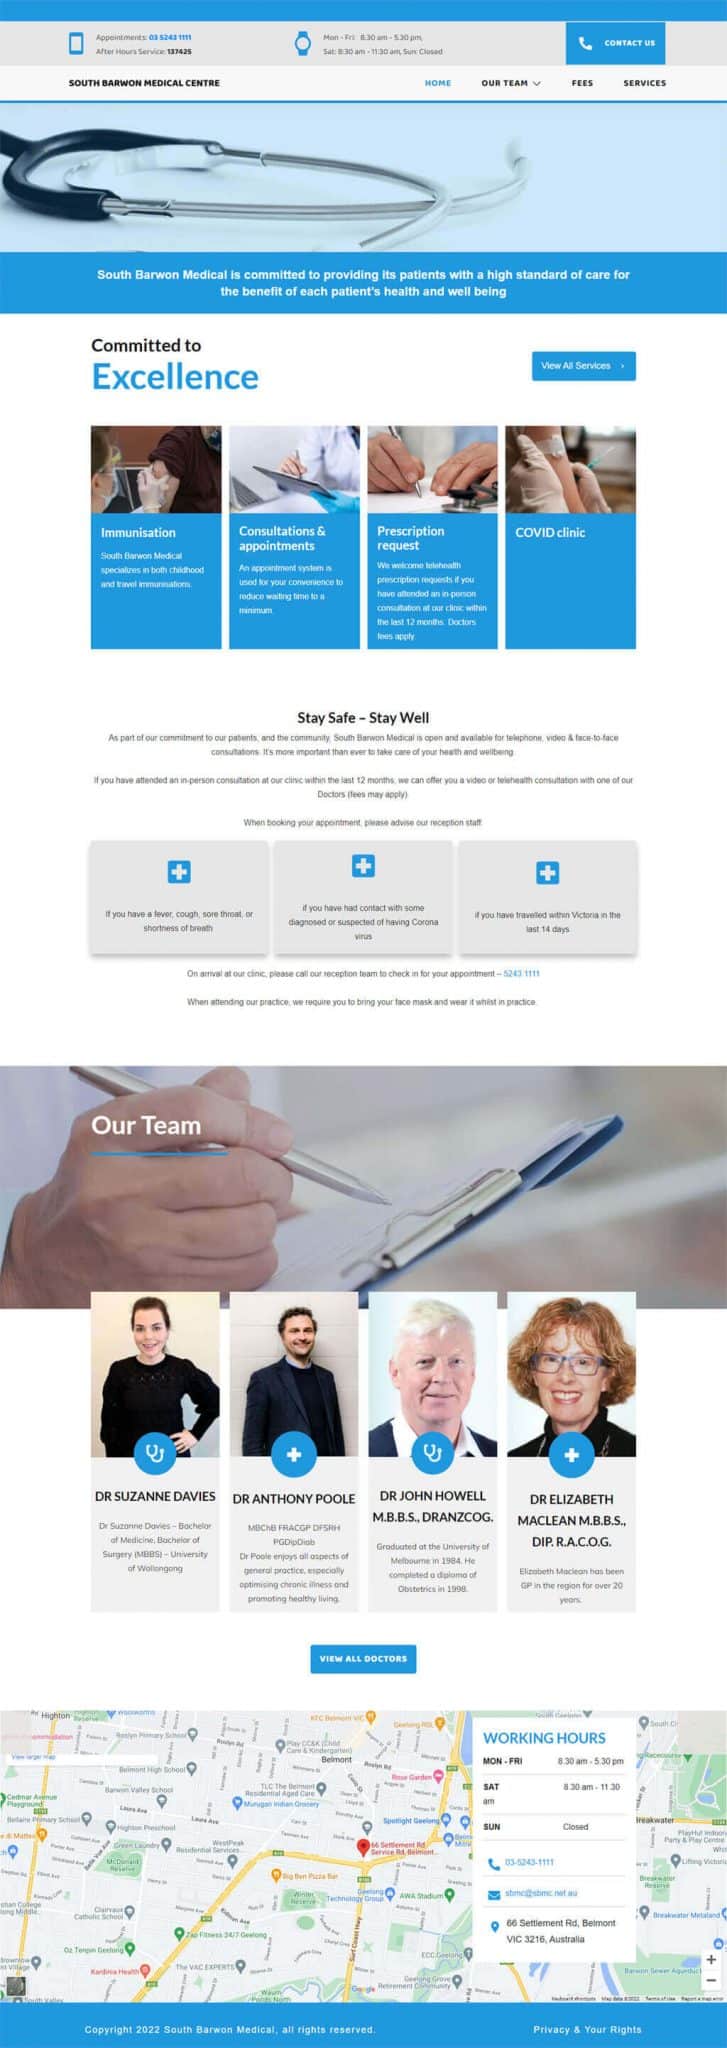 Website designed for the South Barwon Medical Practice through GMHBA